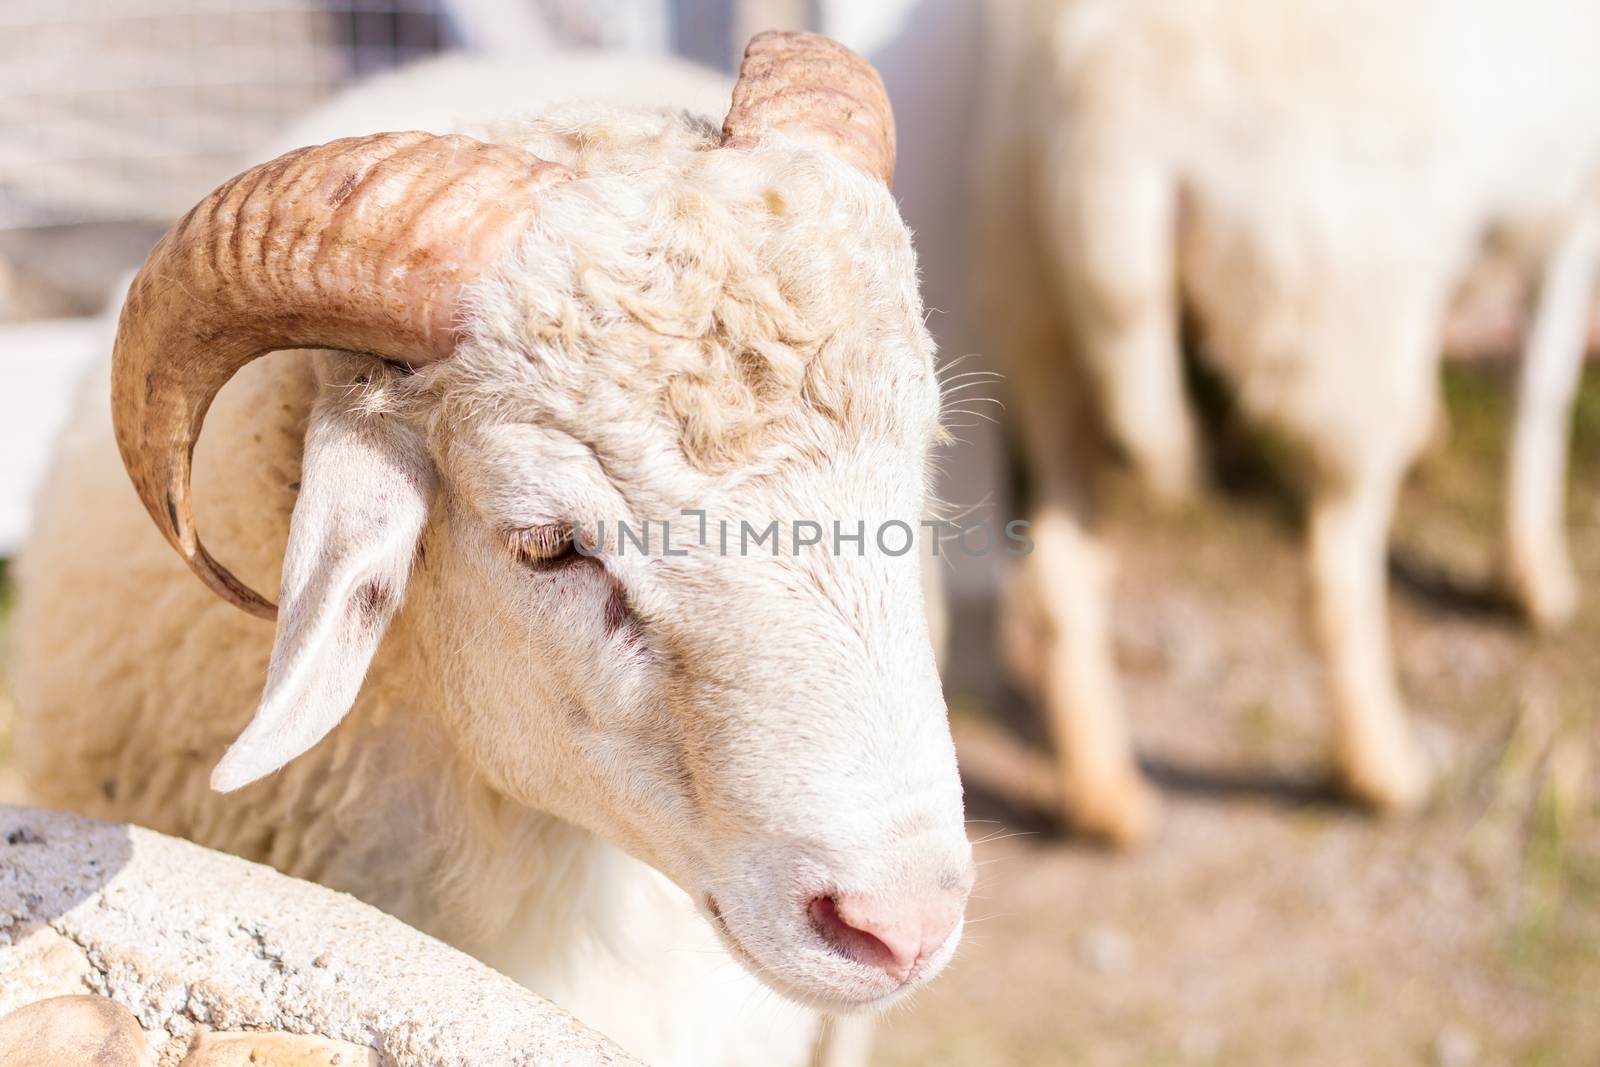 Goats and sheep in farm animals agriculture and nature by nopparats